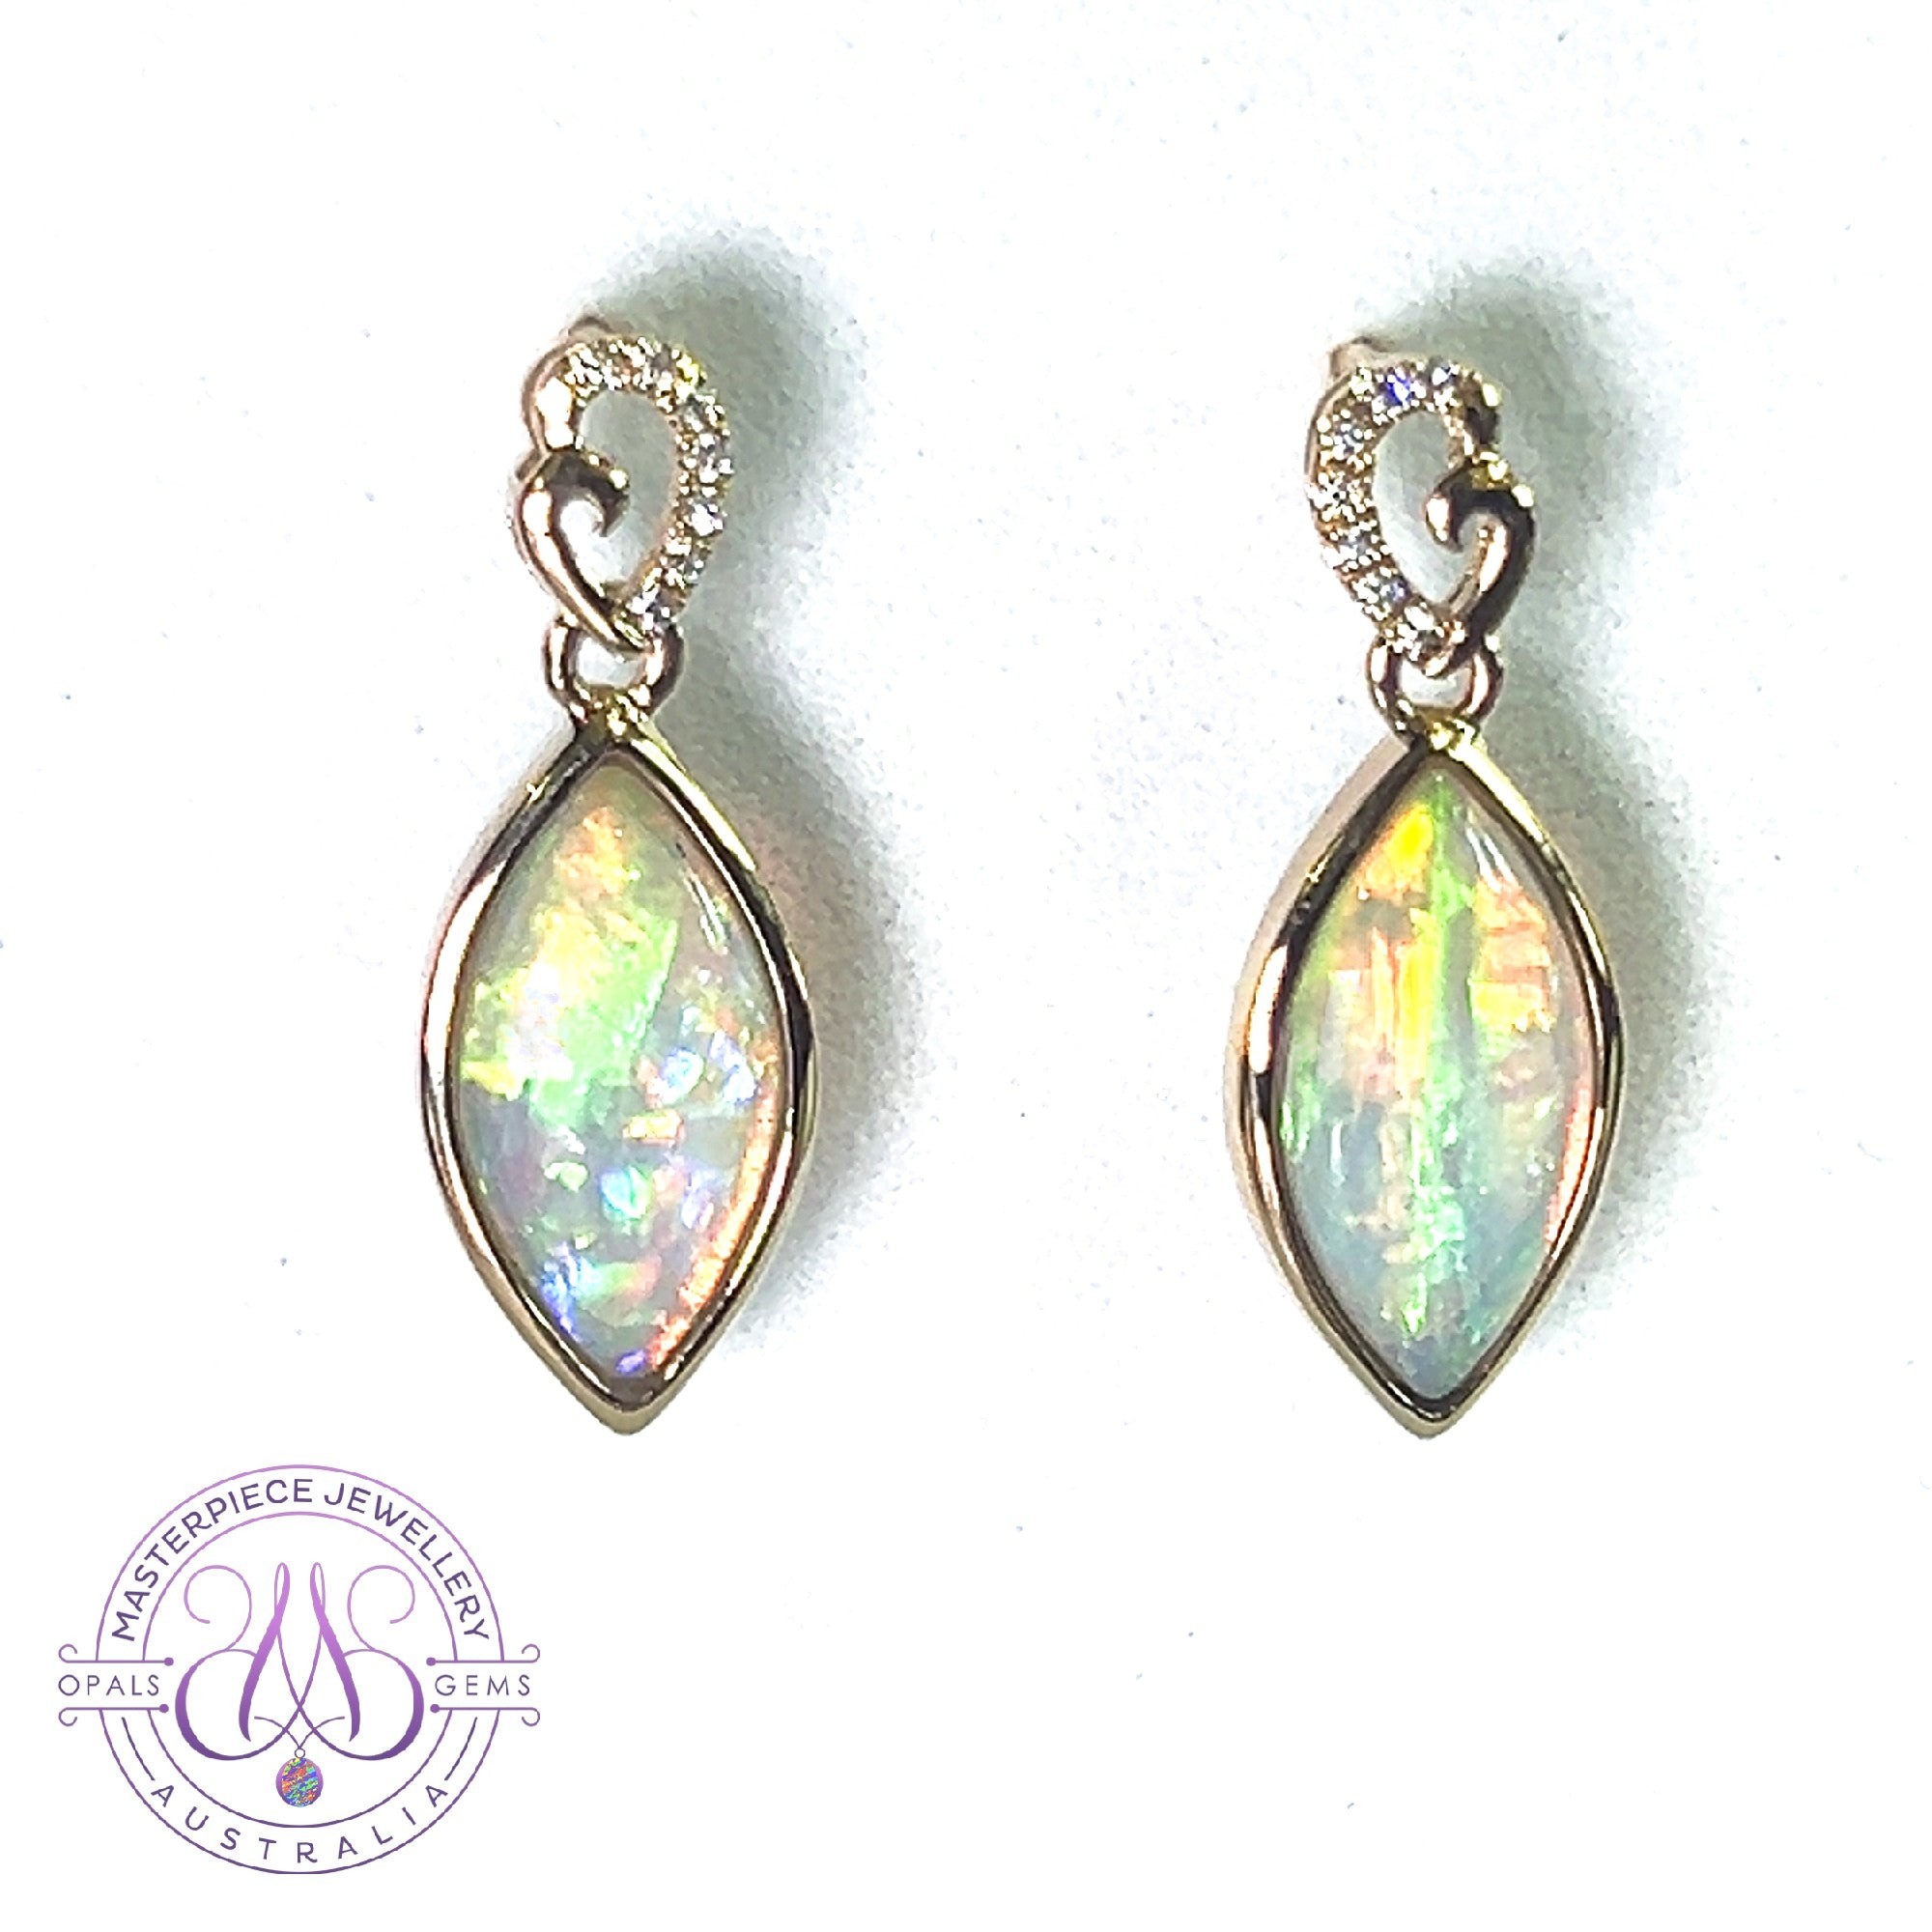 14kt Yellow Gold dangling earrings Marquise shape Crystal Opal 2.06ct and Diamonds